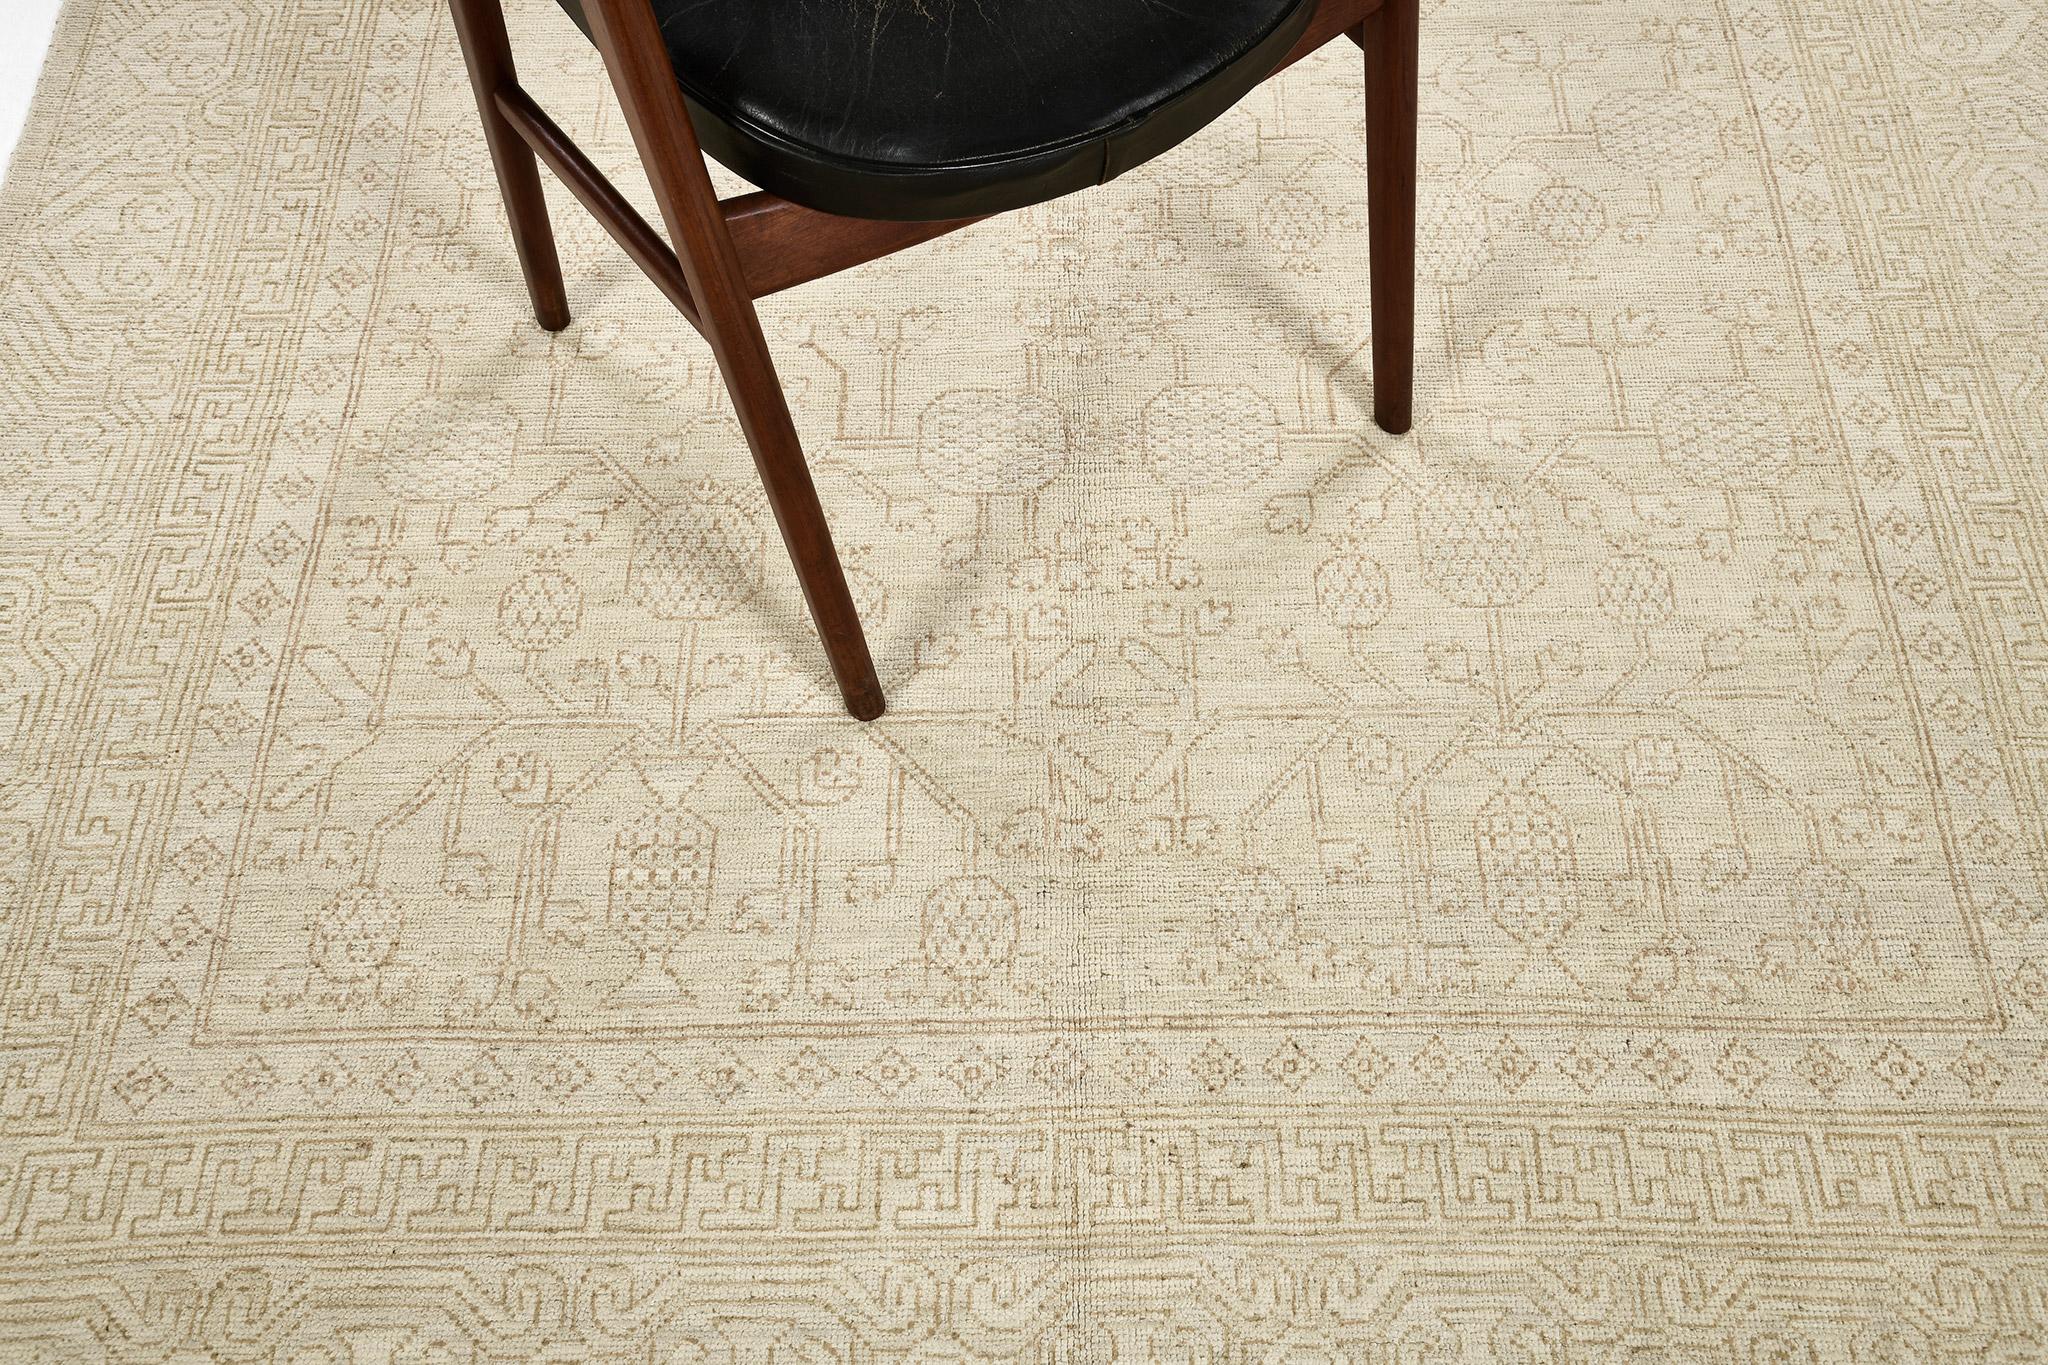 This contemporary Khotan muted revival rug has blending elements from the modern world with light and airy tones. From the pomegranate motif that is complemented with graceful branches and florettes densely fills the artistic composition. This